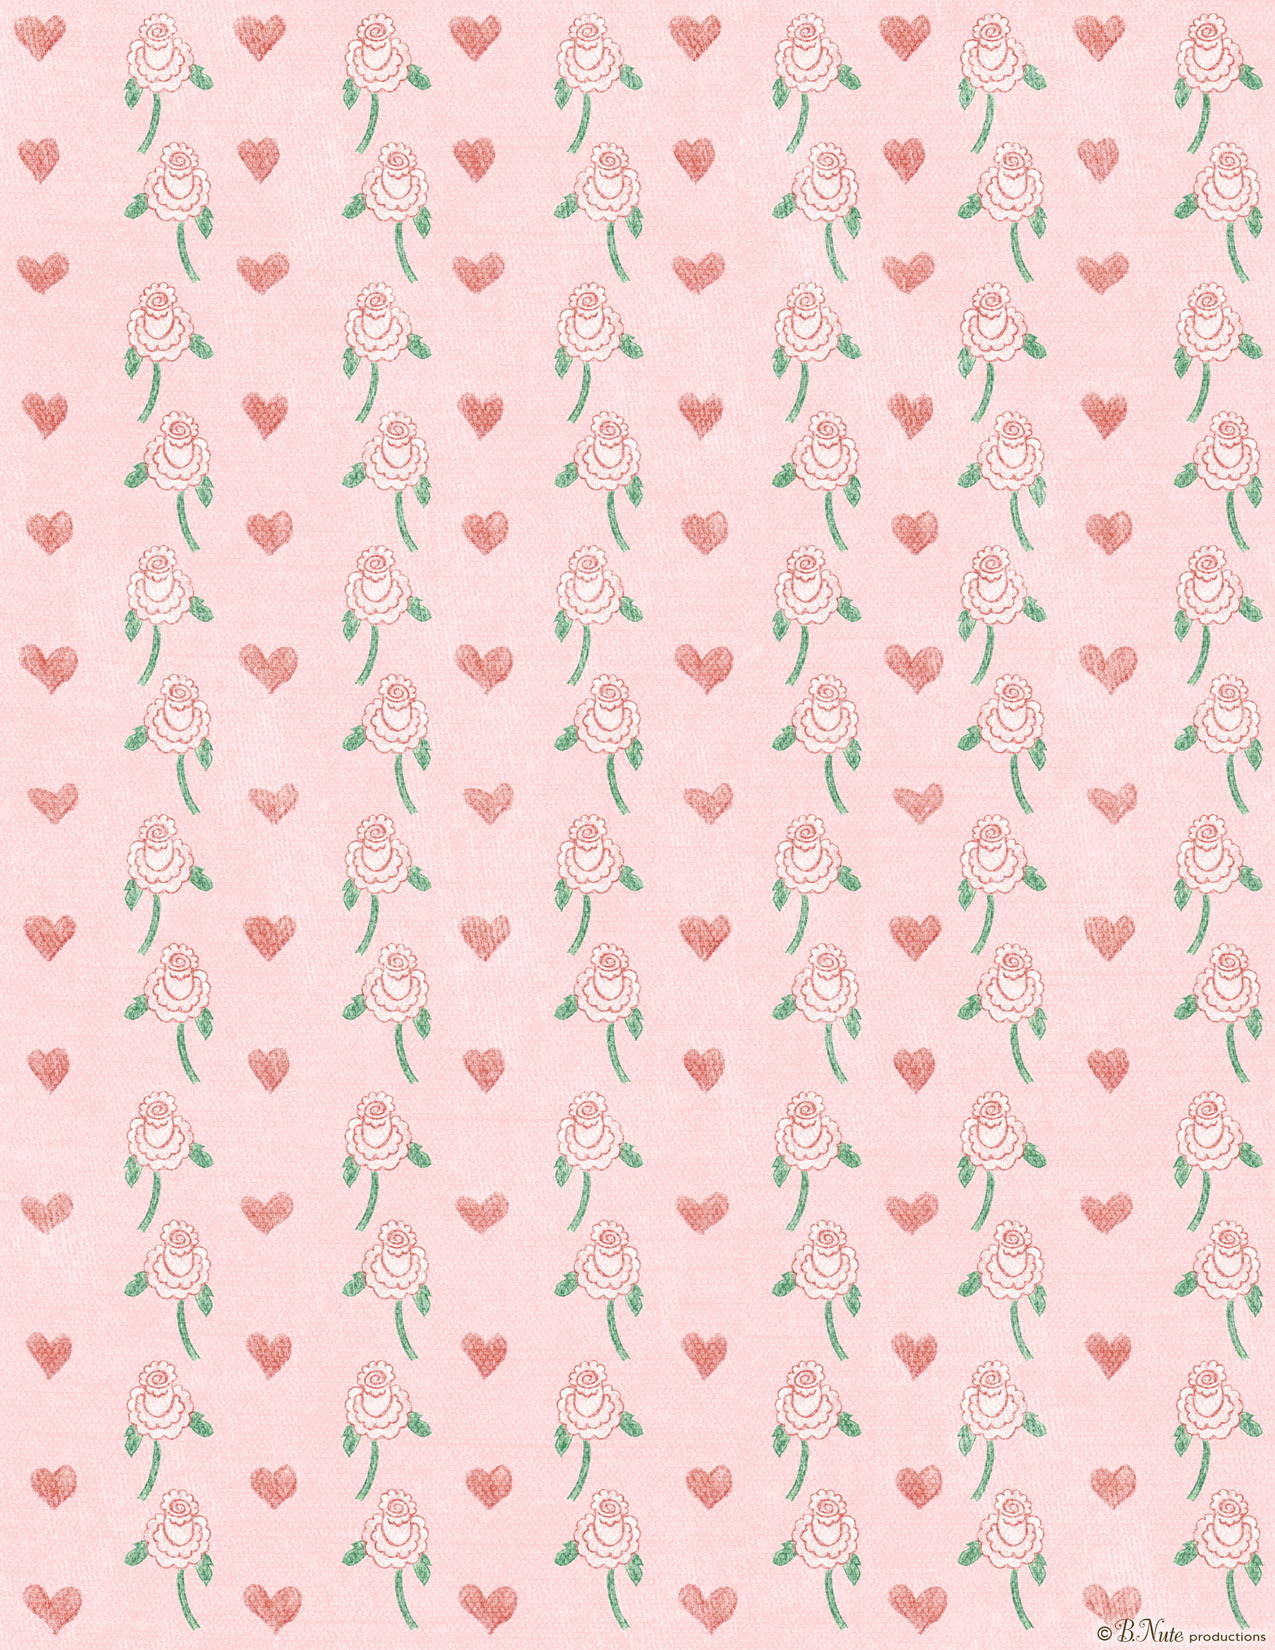 bnute productions: Free Printable Valentine Craft or Scrapbook Paper